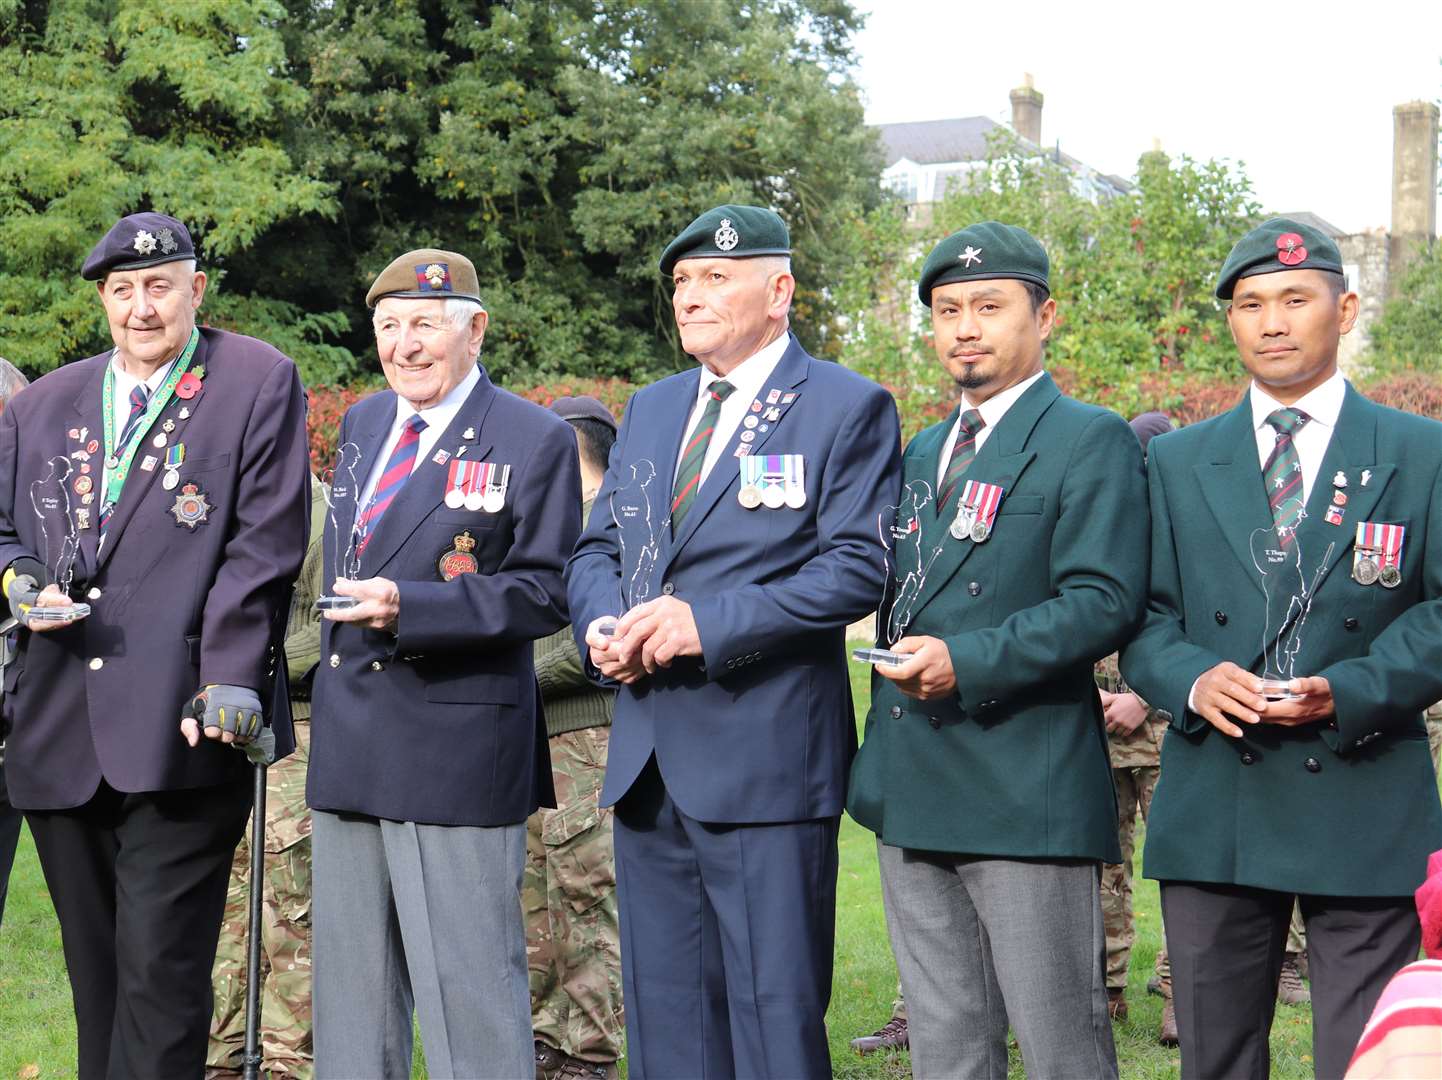 Nigel Bird, second from left, with other veterans, Peter Topley, Martin Aldridge, Anil Gurun and Tirthraj Thapa. Picture: Geoff Watkins/Aerial Imaging SE